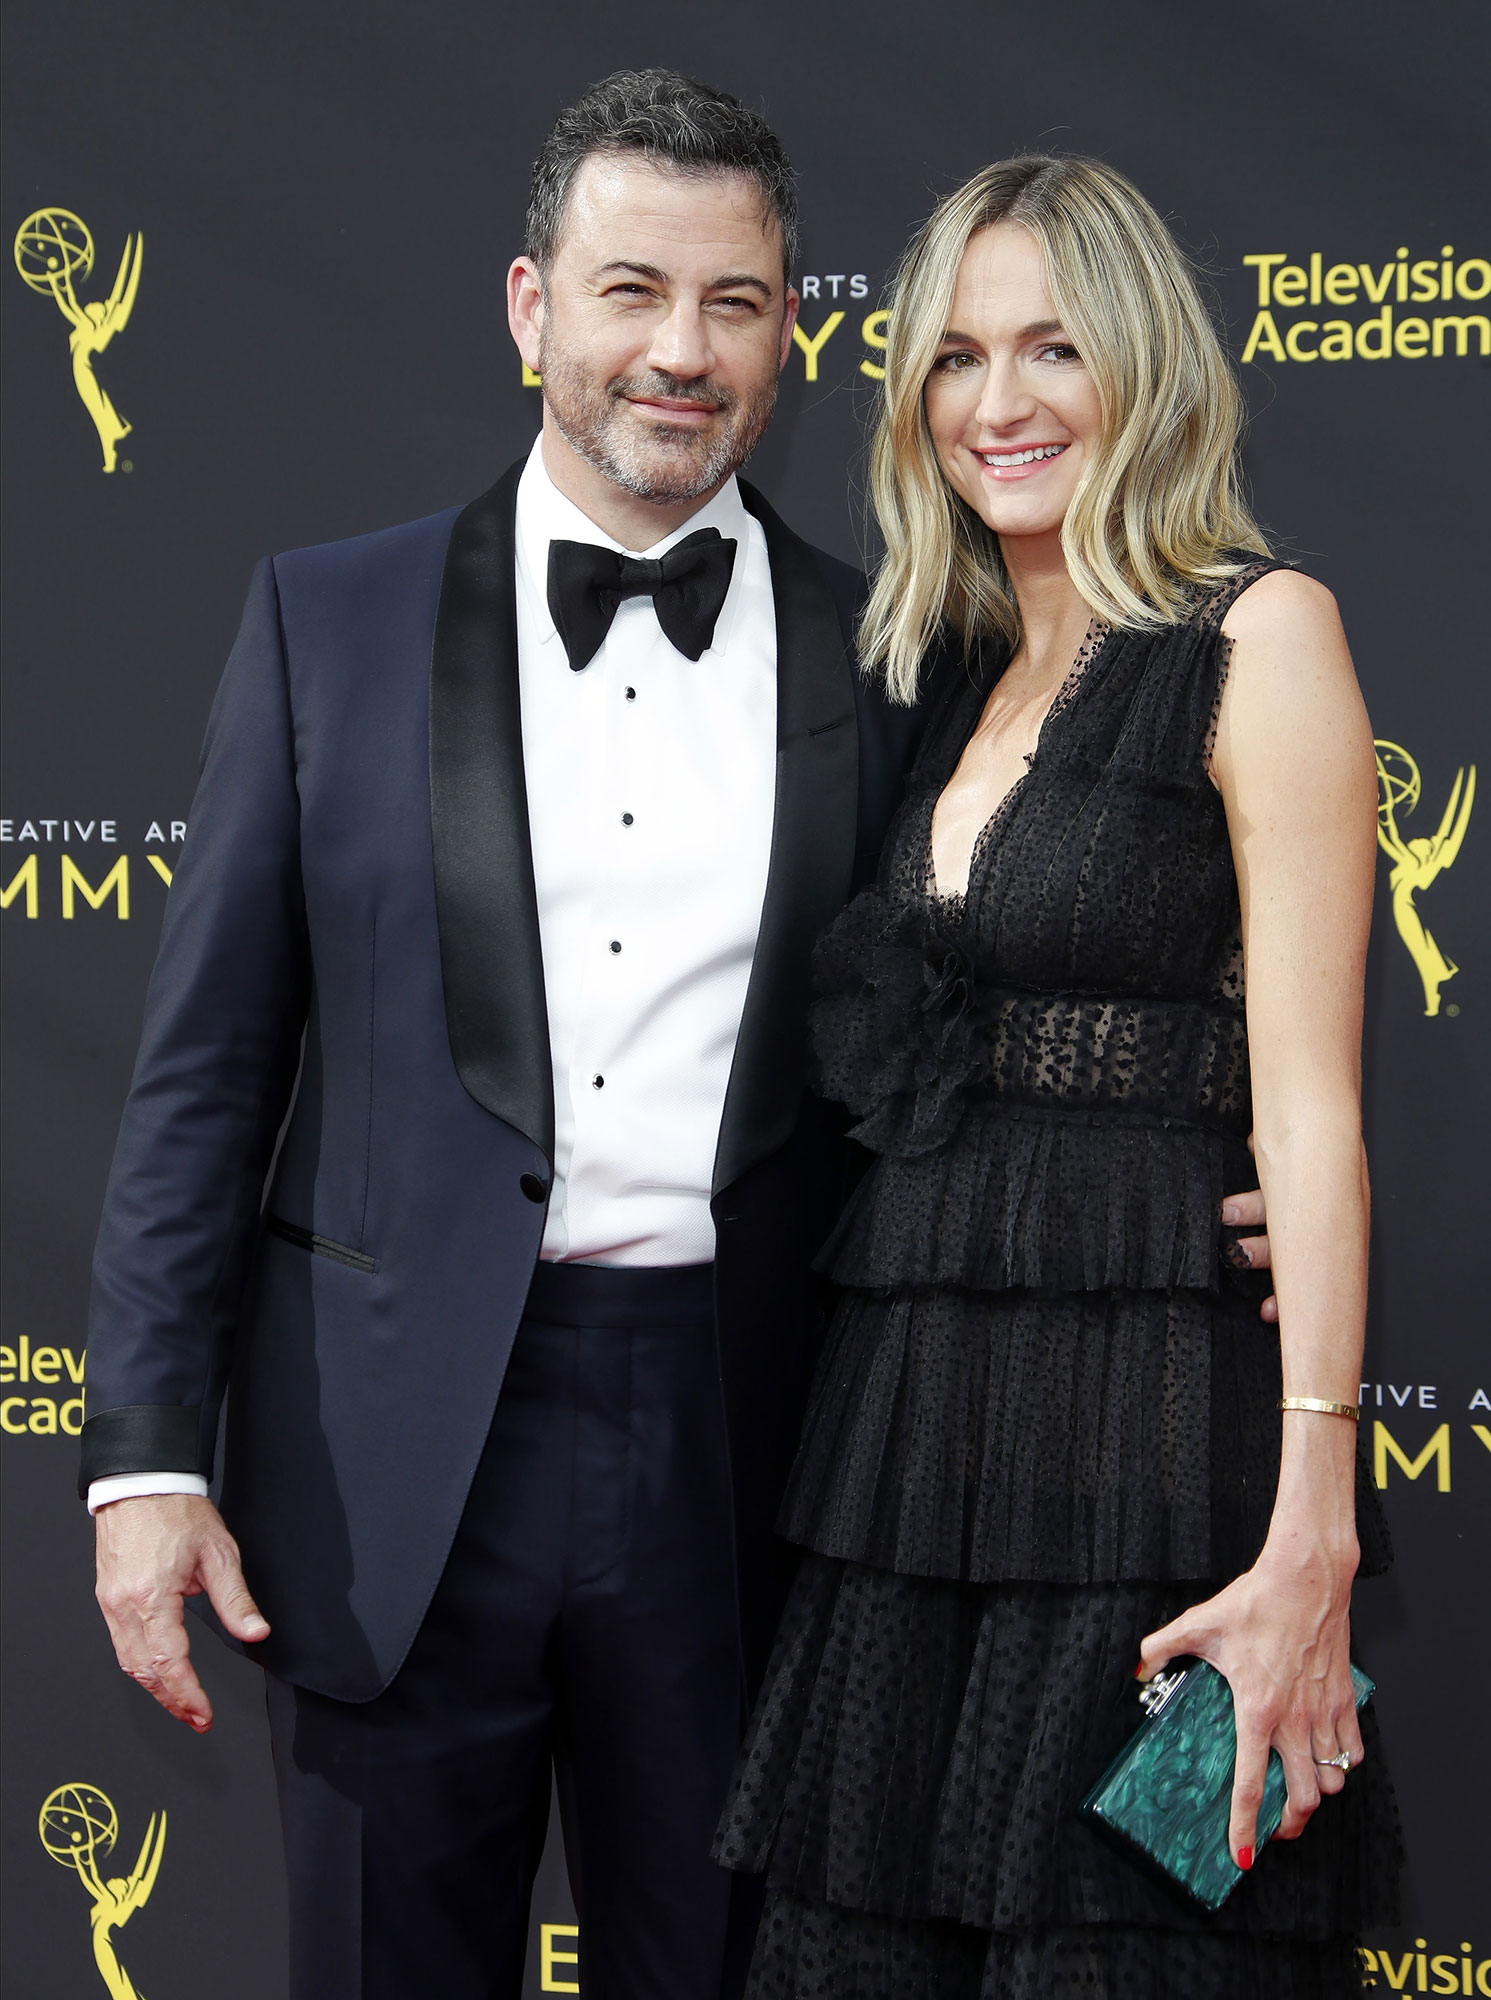 Jimmy Kimmel and Molly McNearney's Family Photos Over the Years